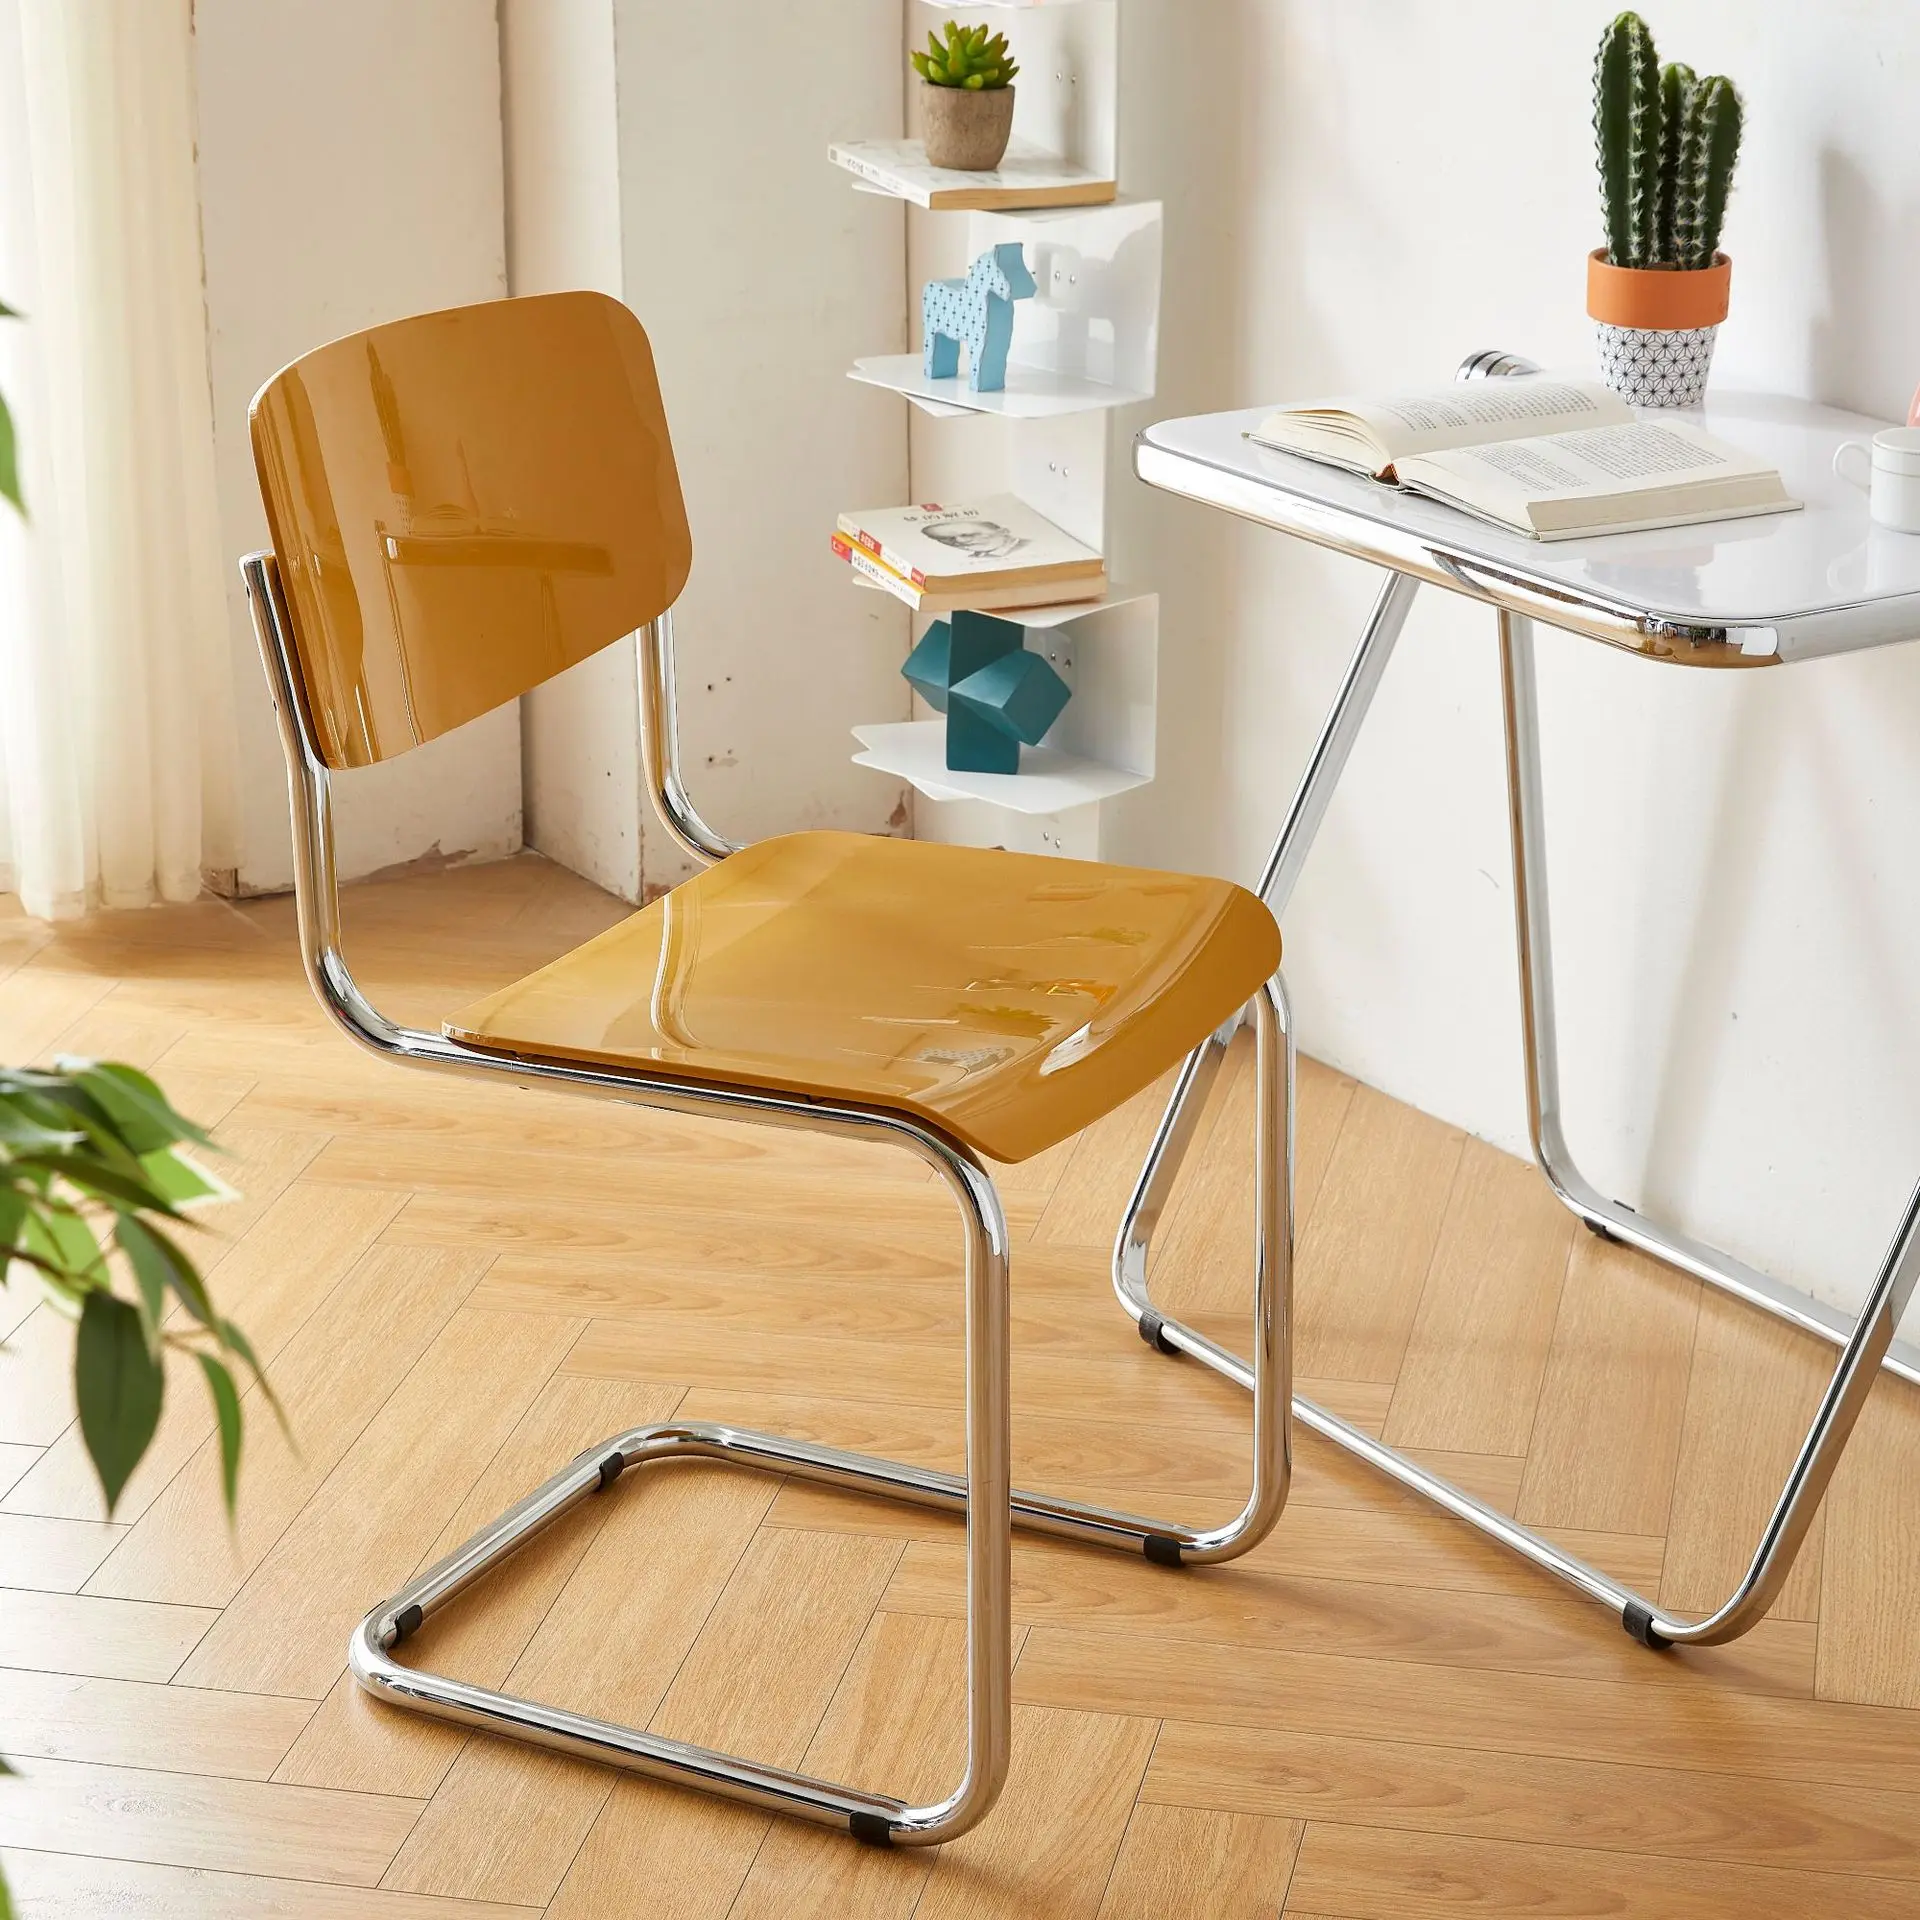 

Modern Minimalist Backrest Dining Chair Home Small Apartment Bedroom Dressing Stool Office Chair Nordic Iron Chair Furniture HY